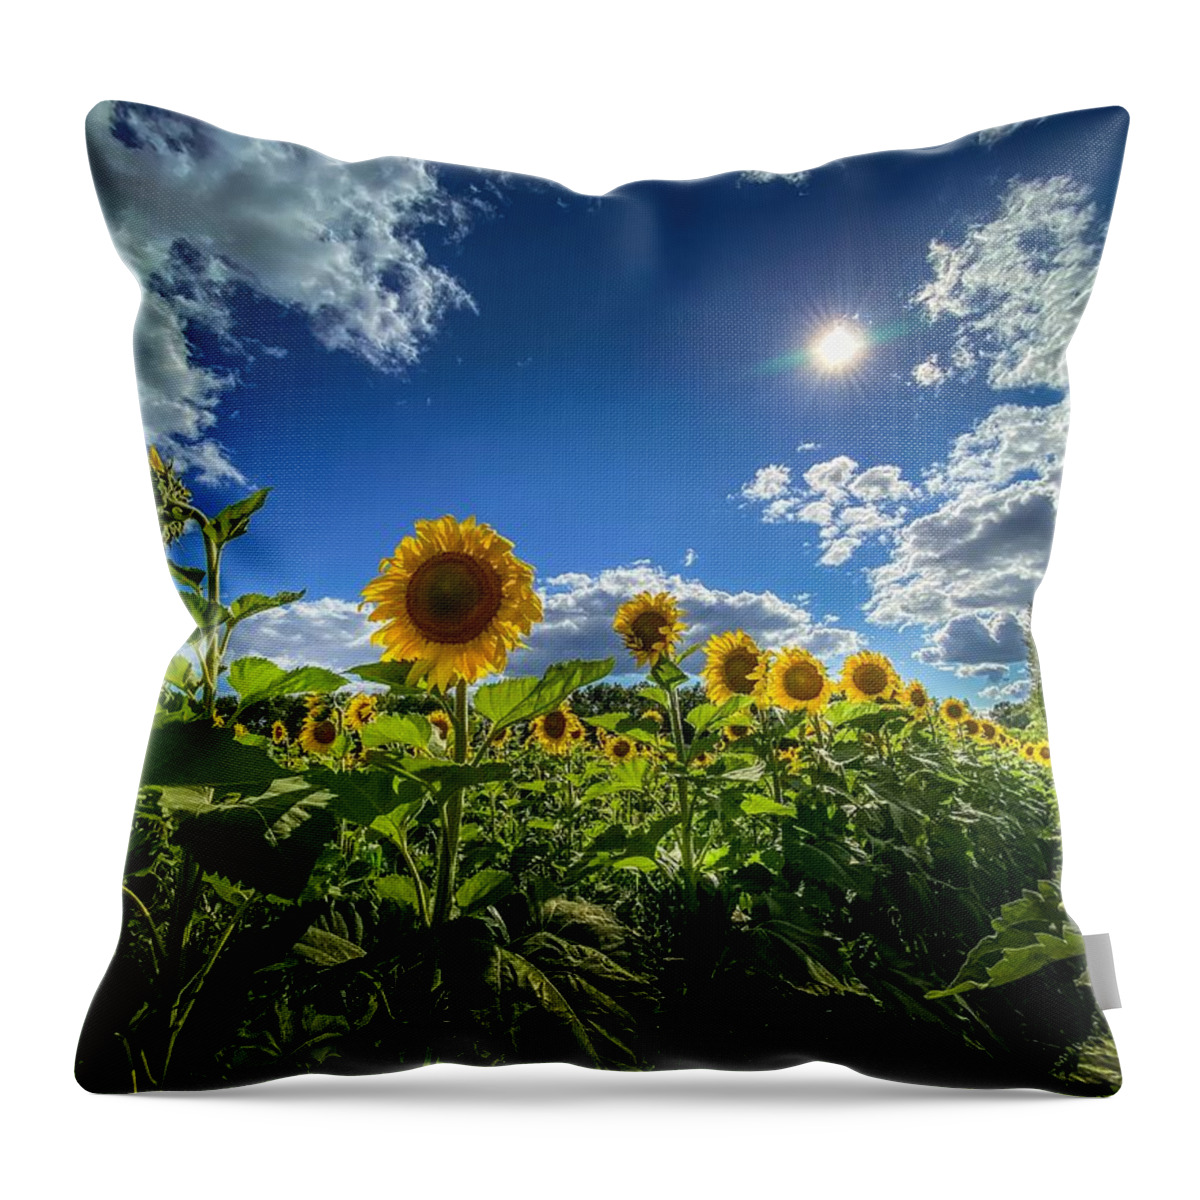 Flower Throw Pillow featuring the photograph Sunflowers in Bloom by Susan Rydberg